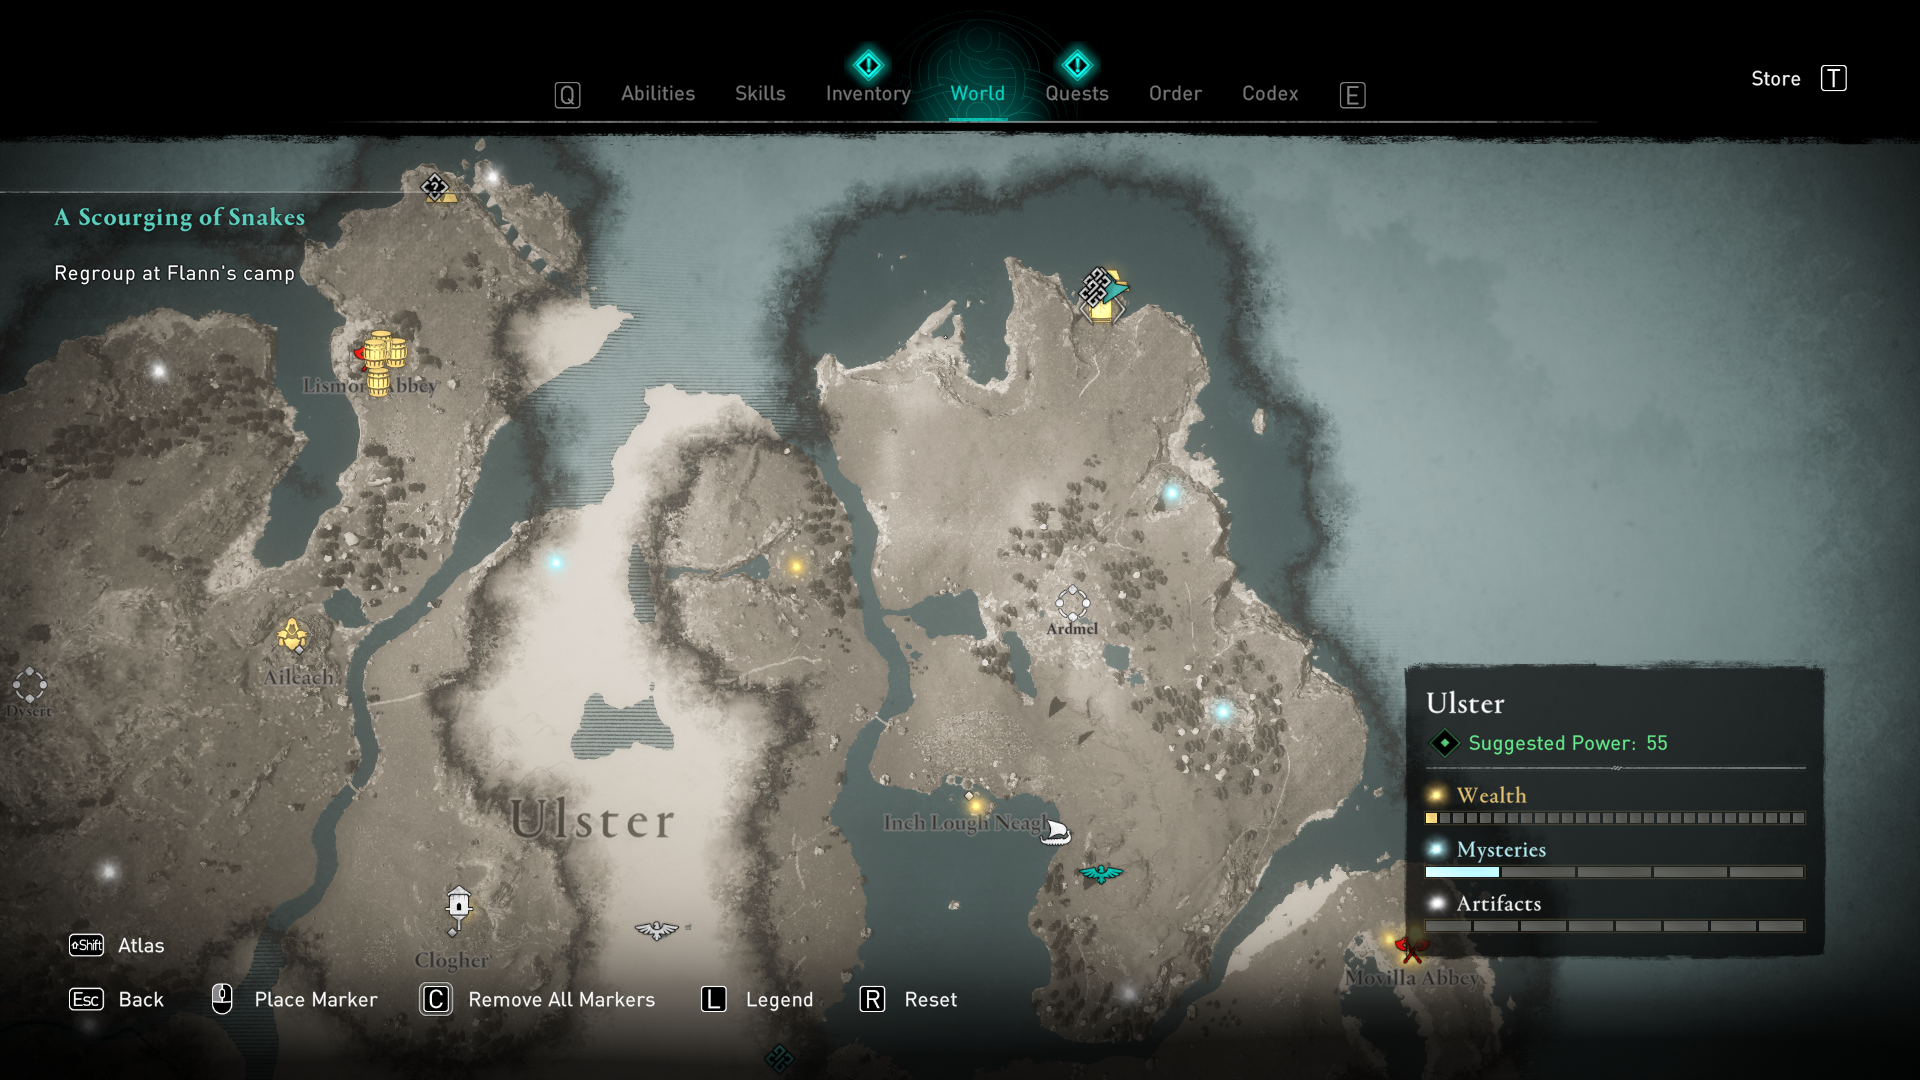 Assassin's Creed Valhalla Wrath Of The Druids Walkthrough: How To Complete The Wages Of War